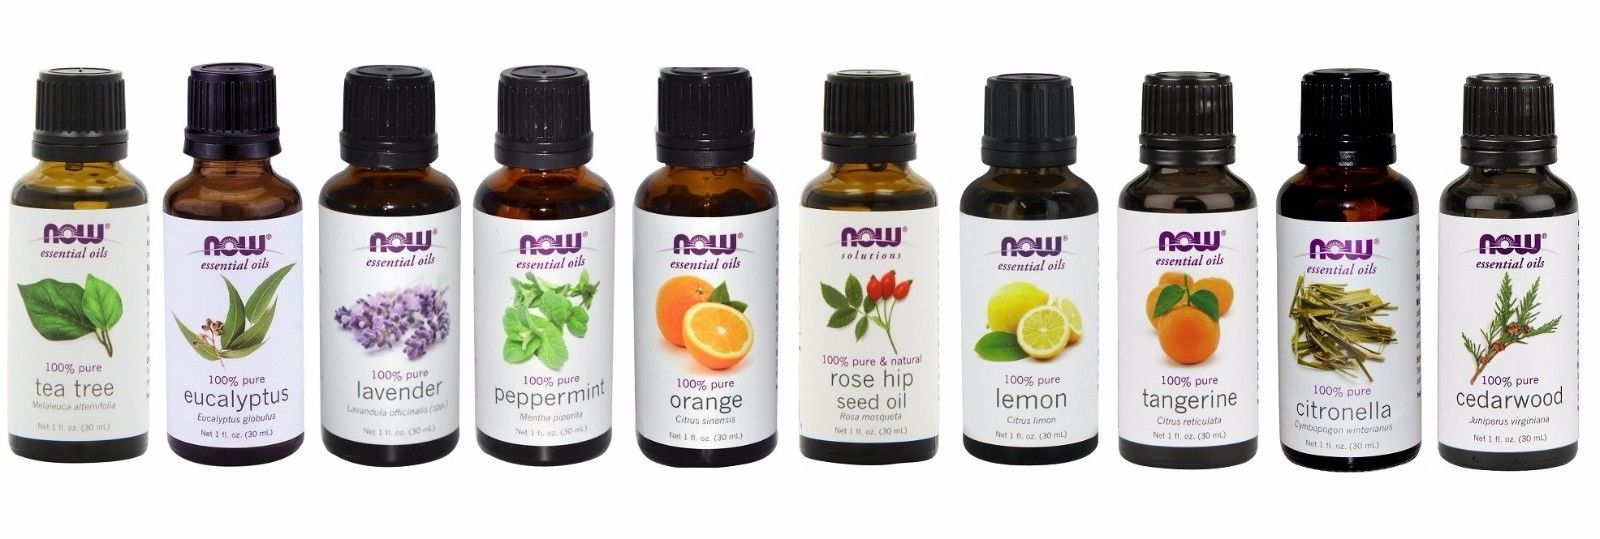 now-foods-essential-oils-pack-of-10 - Supplements-Natural & Organic Vitamins-Essentials4me